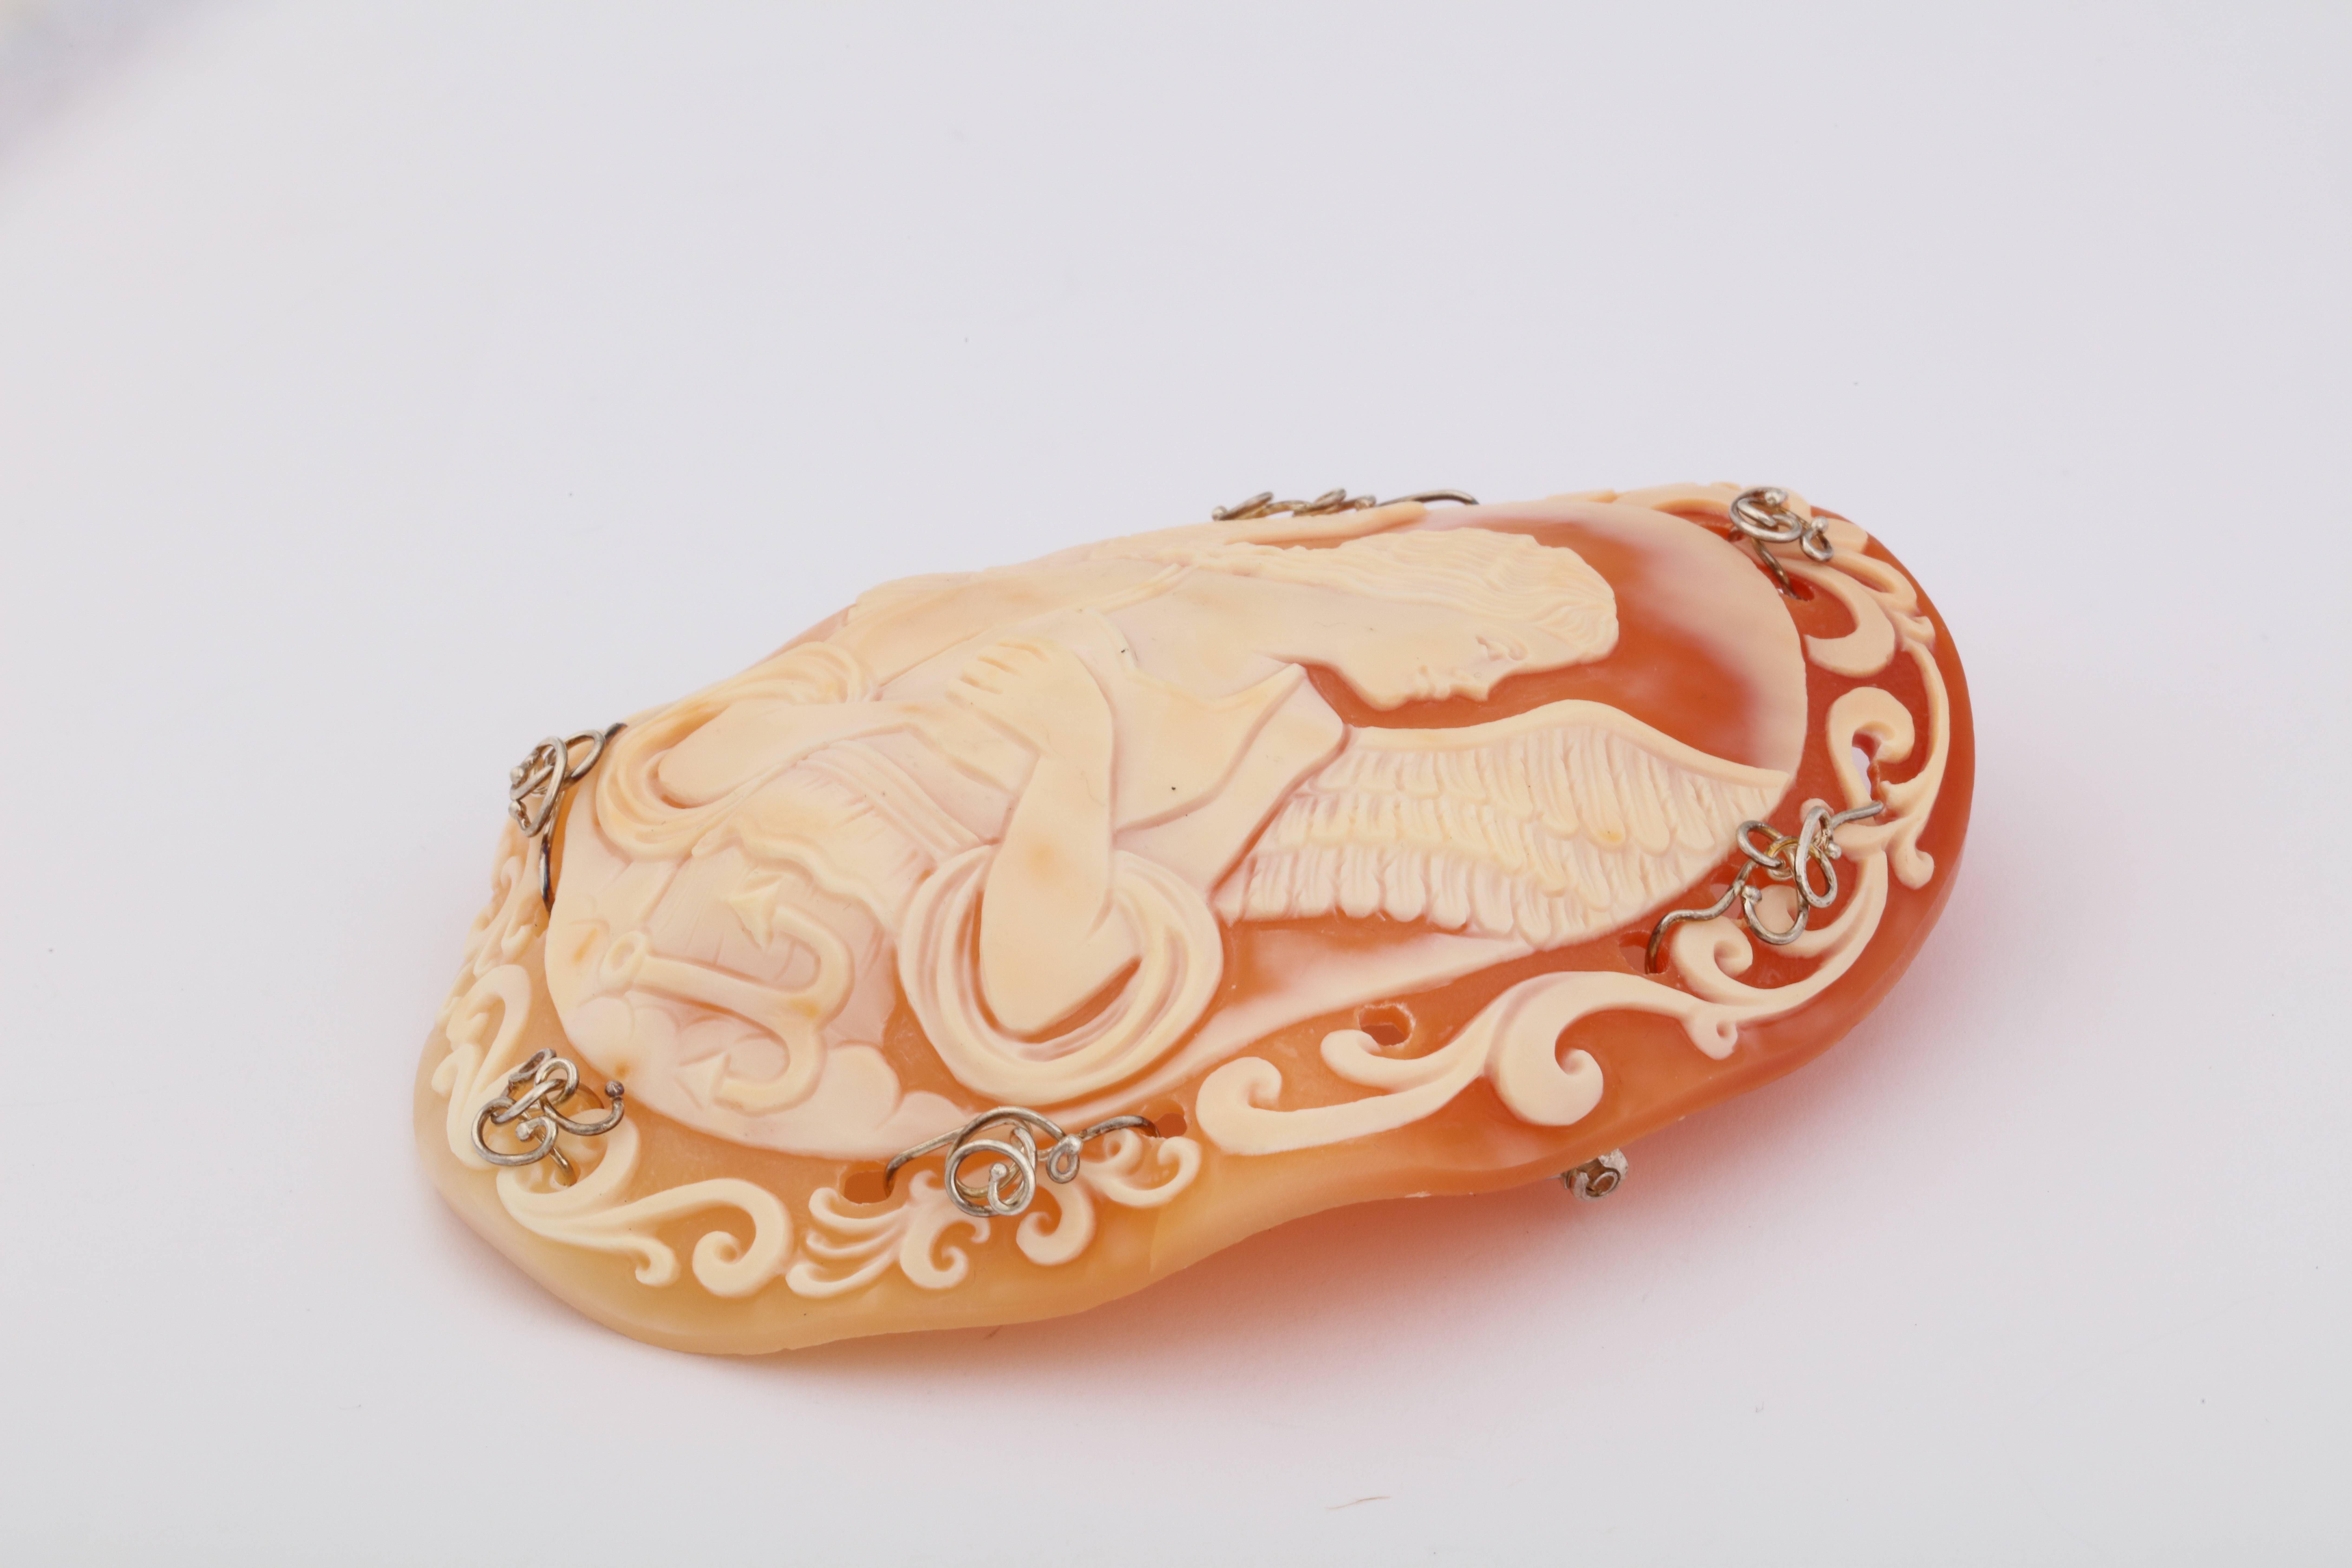 90mm Cornelian shell cameo hand-carved, set in sterling silver with 18